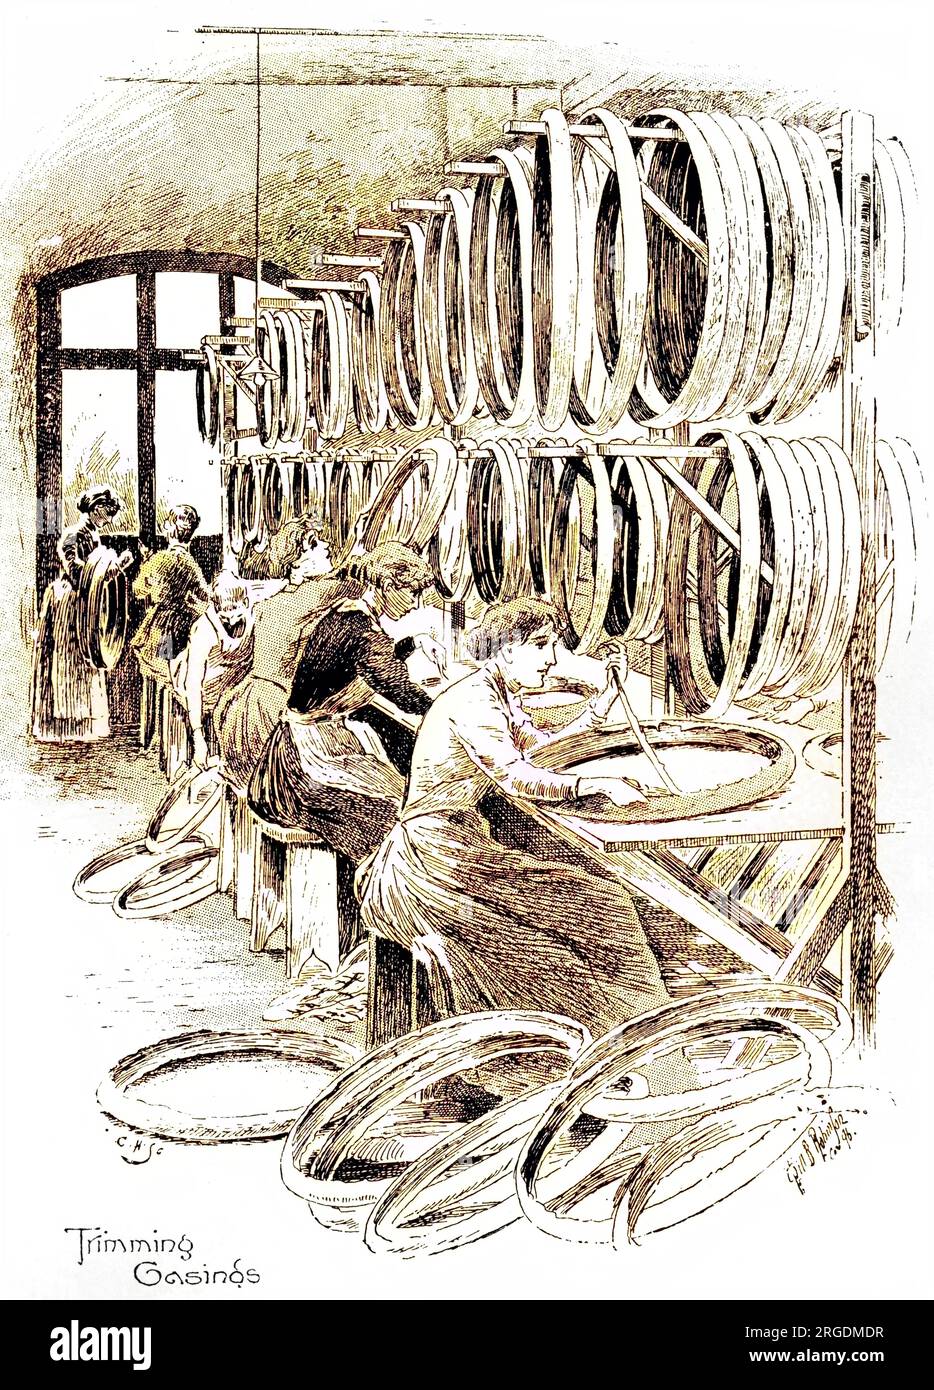 Manufacture of cycling accessories: women trimming the casings of Dunlop tyres. Stock Photo